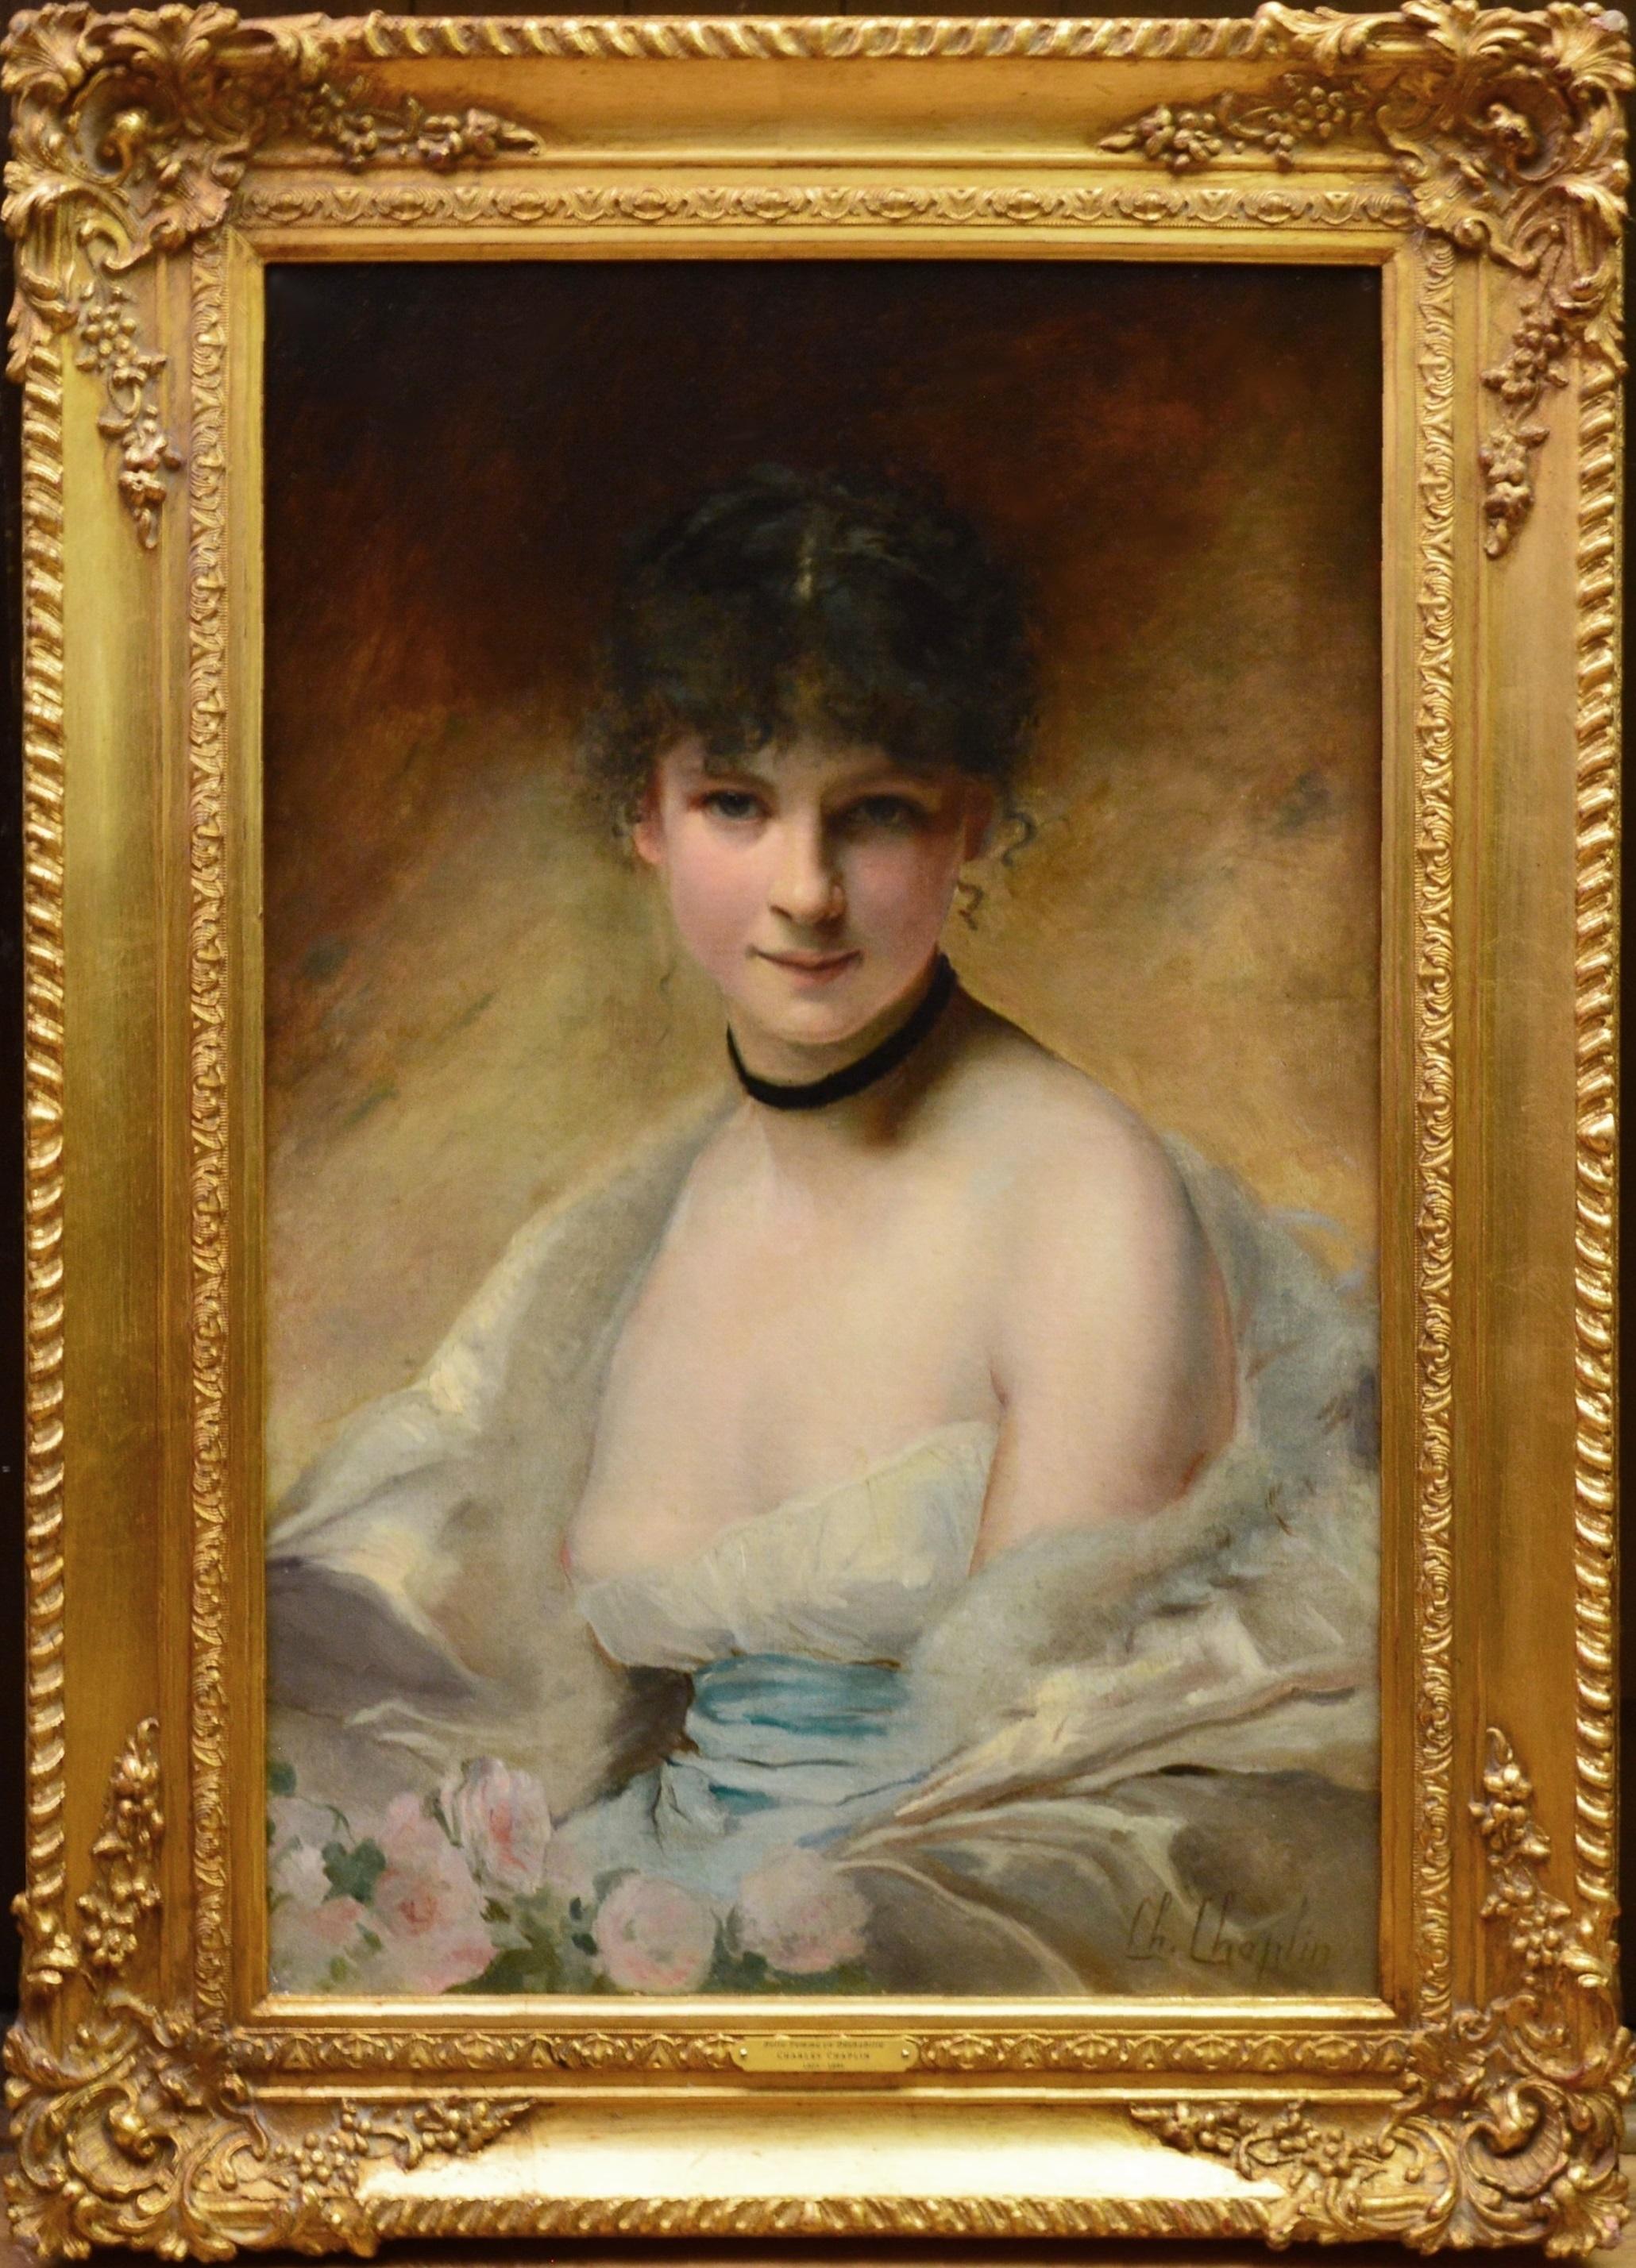 Charles Joshua Chaplin Nude Painting - Belle Femme en Déshabillé - 19th Century French Portrait of Young Society Beauty